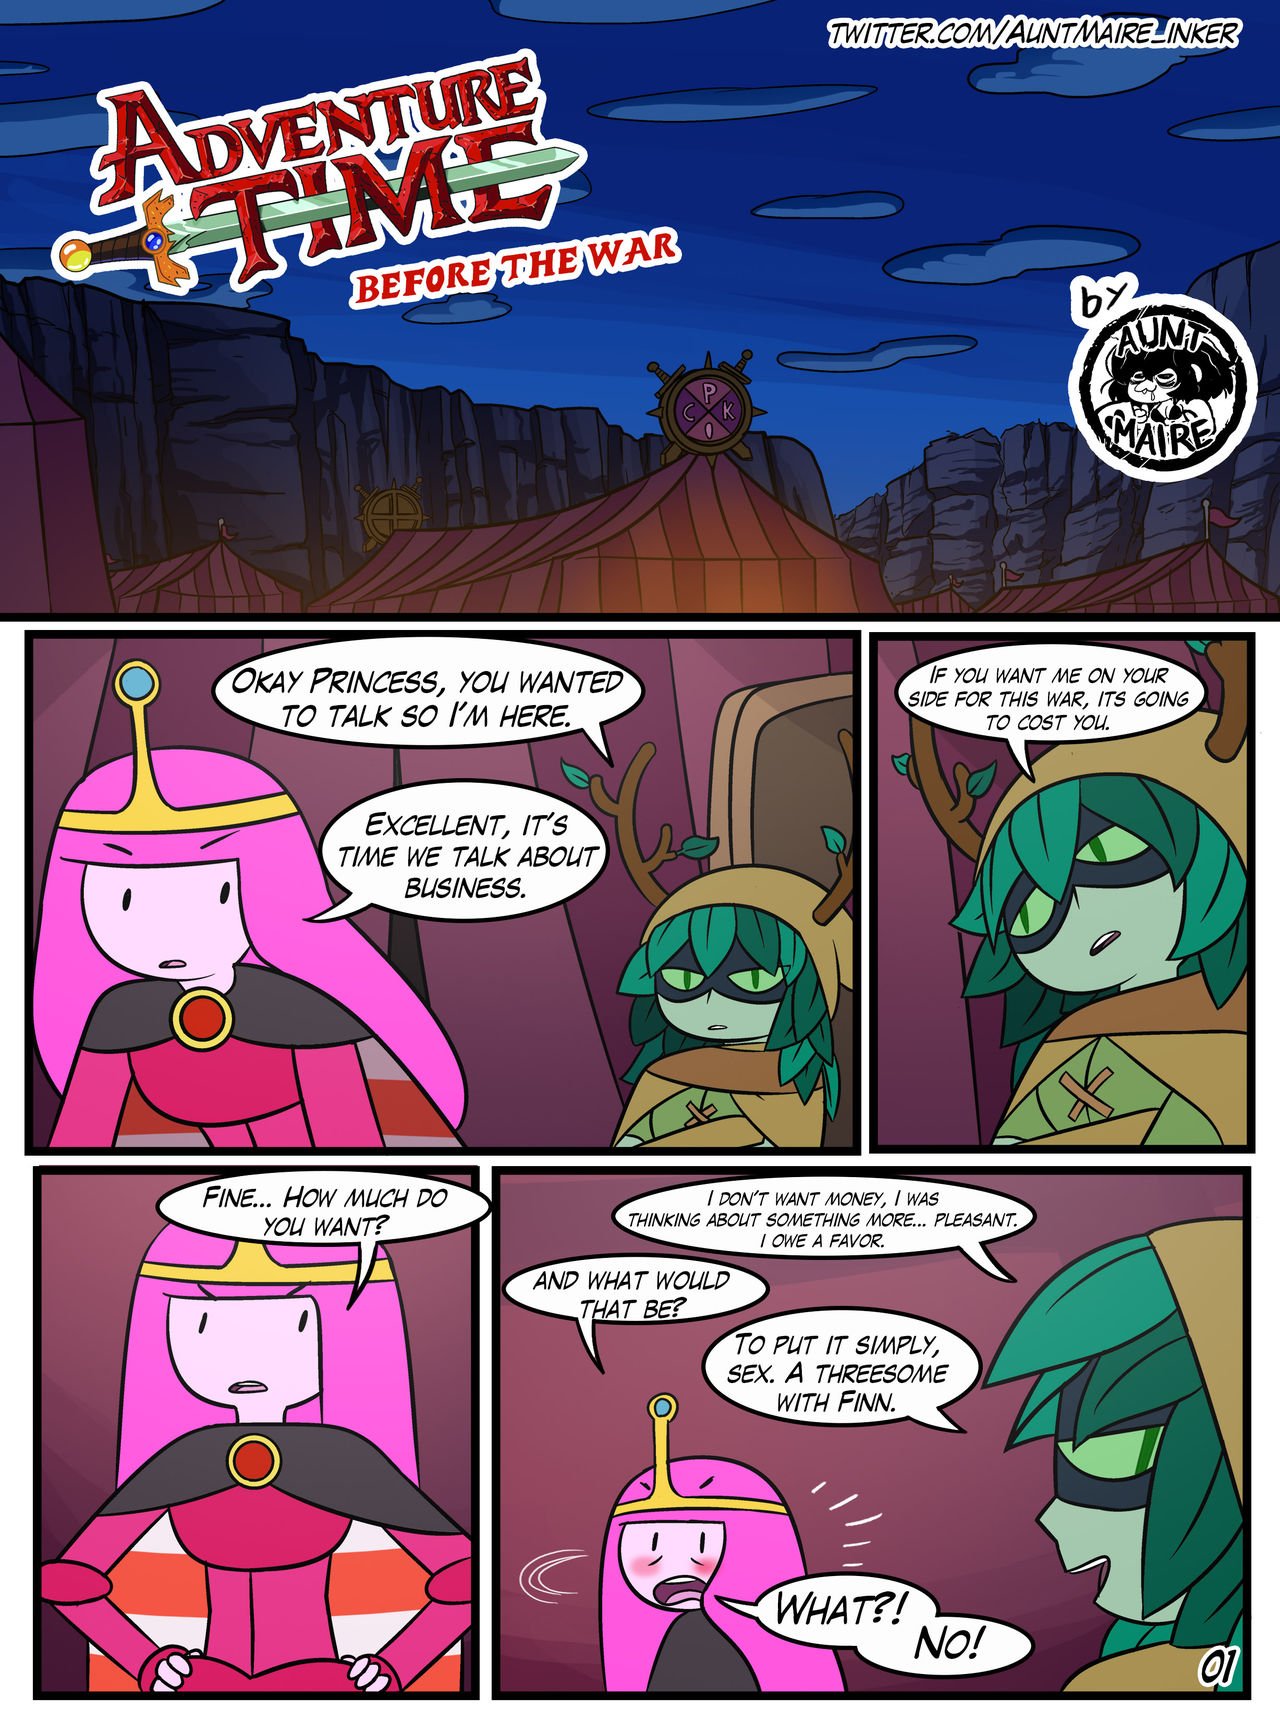 Misadventure Time Porn - Adventure Time: Before the War - By Inkershike porn comic